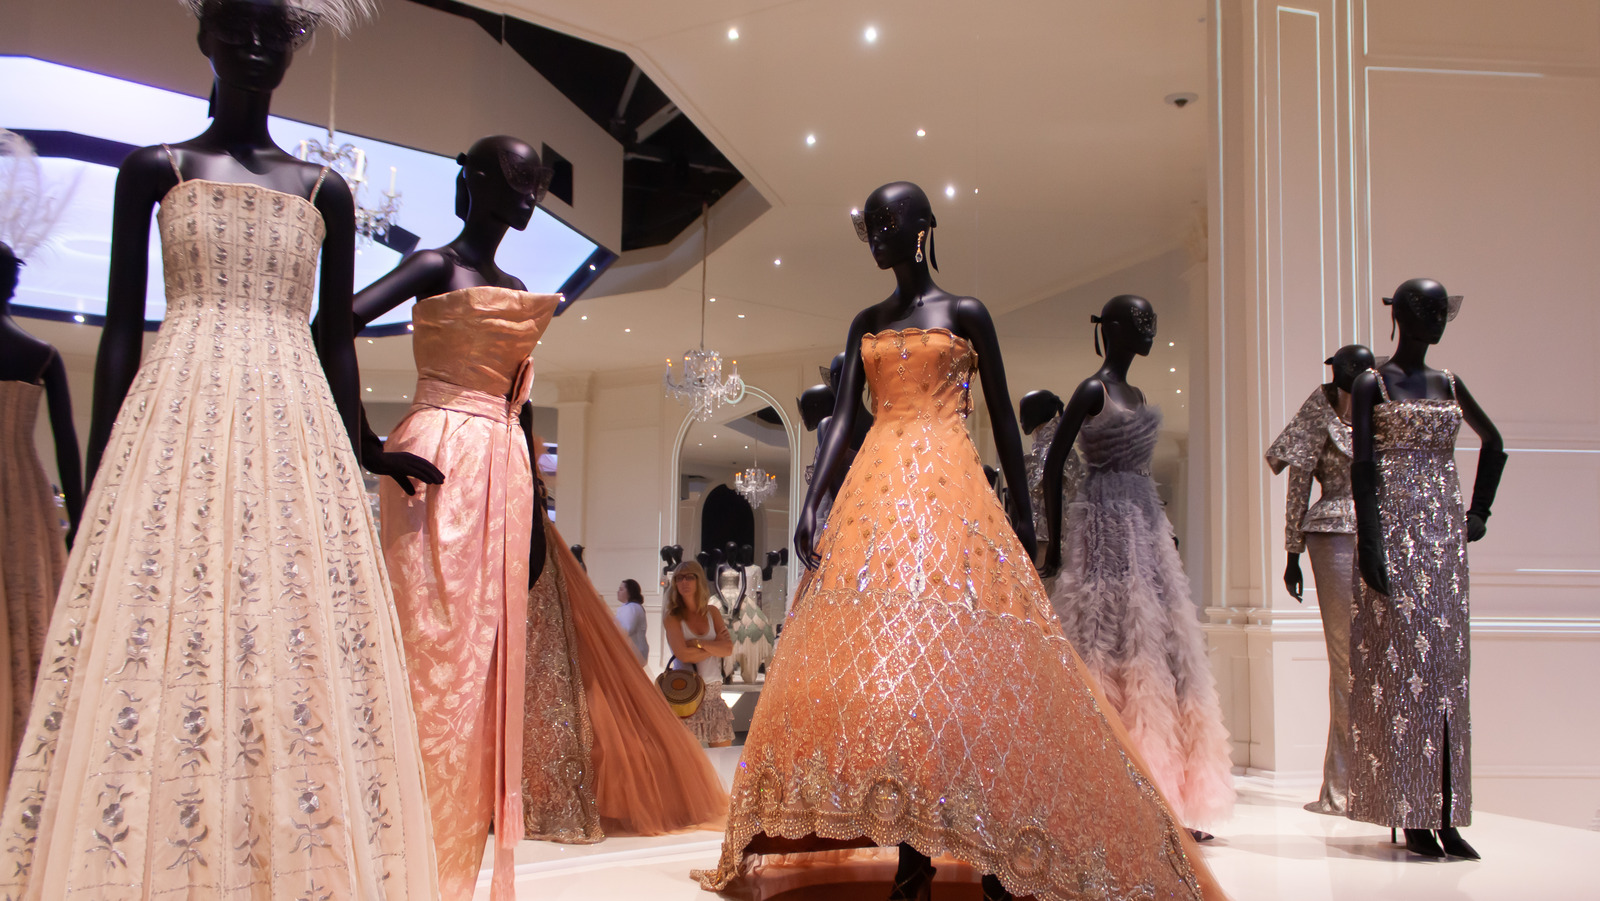 Who's behind Dior's transformation into a megabrand? The kinetic